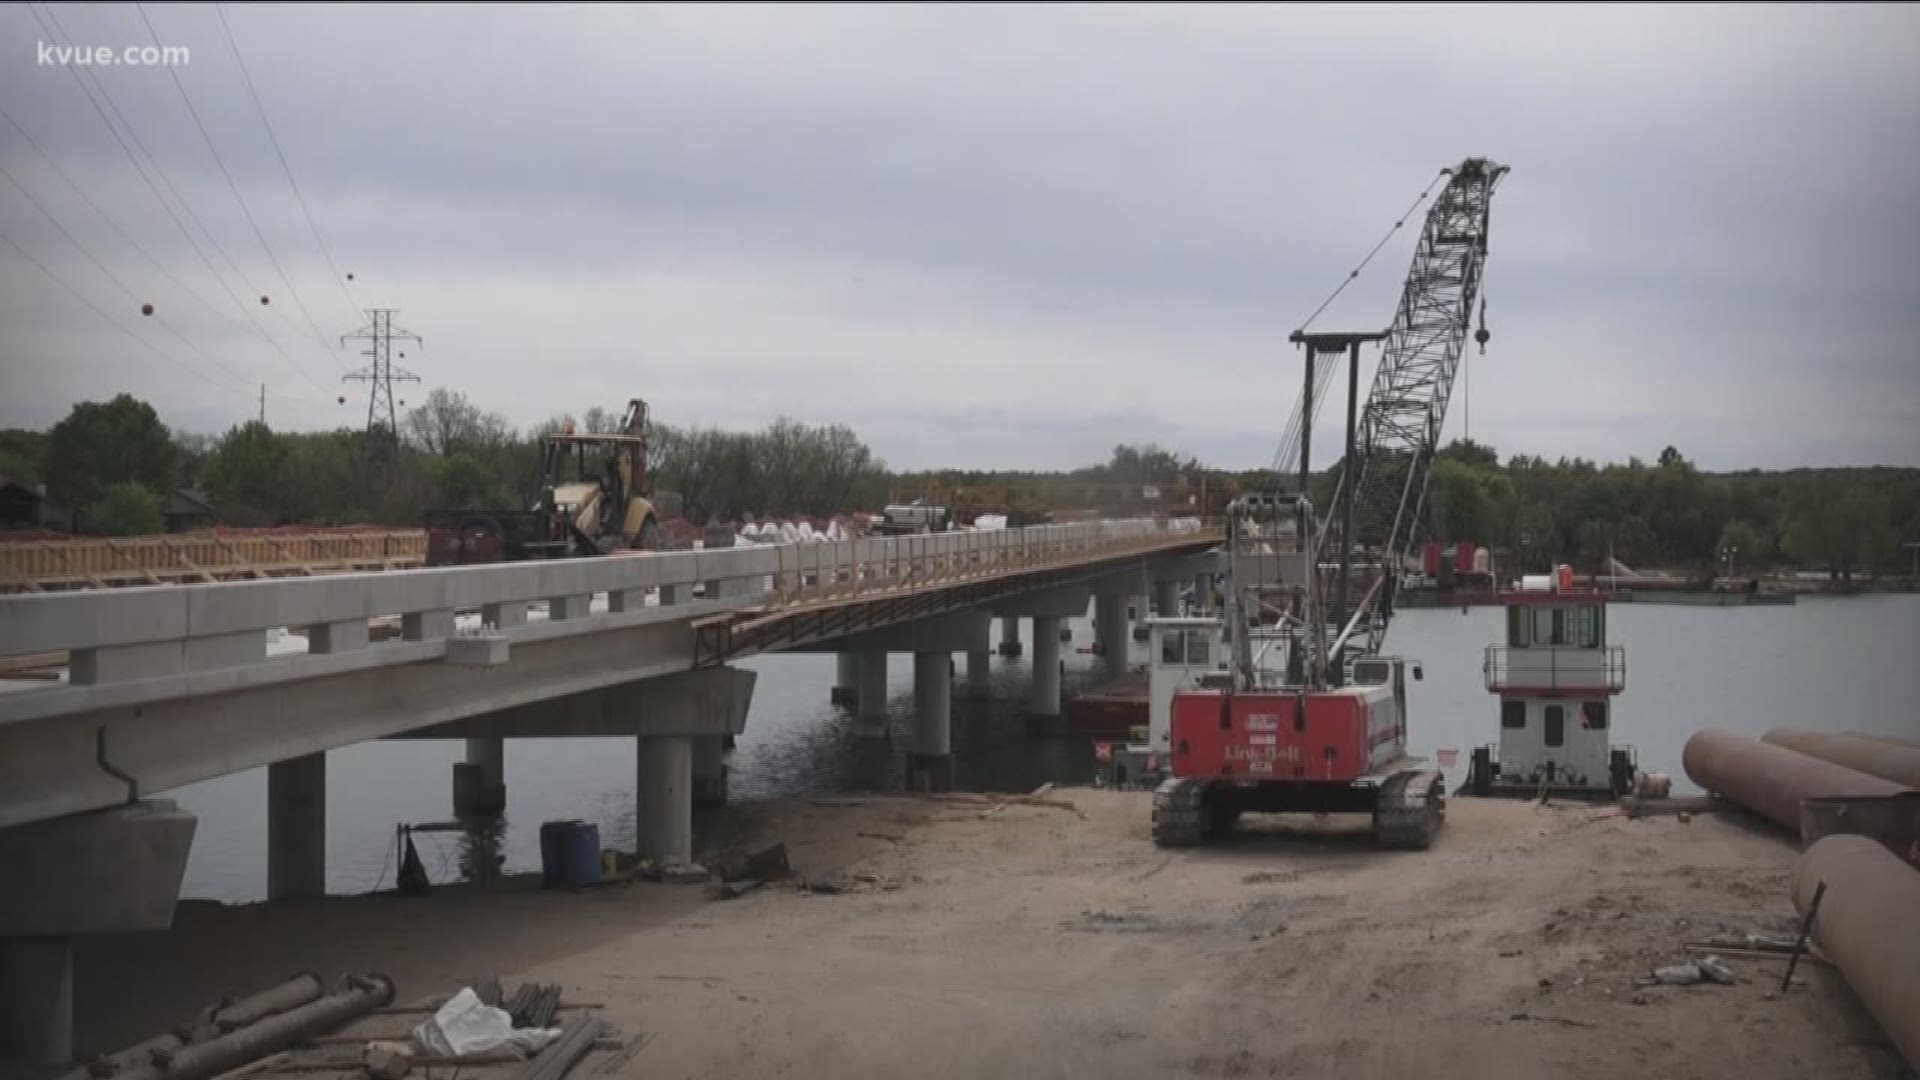 Since record flooding wiped out the RM 2900 bridge in October, crews have been working hard to clean up the area and rebuild the vital passageway.